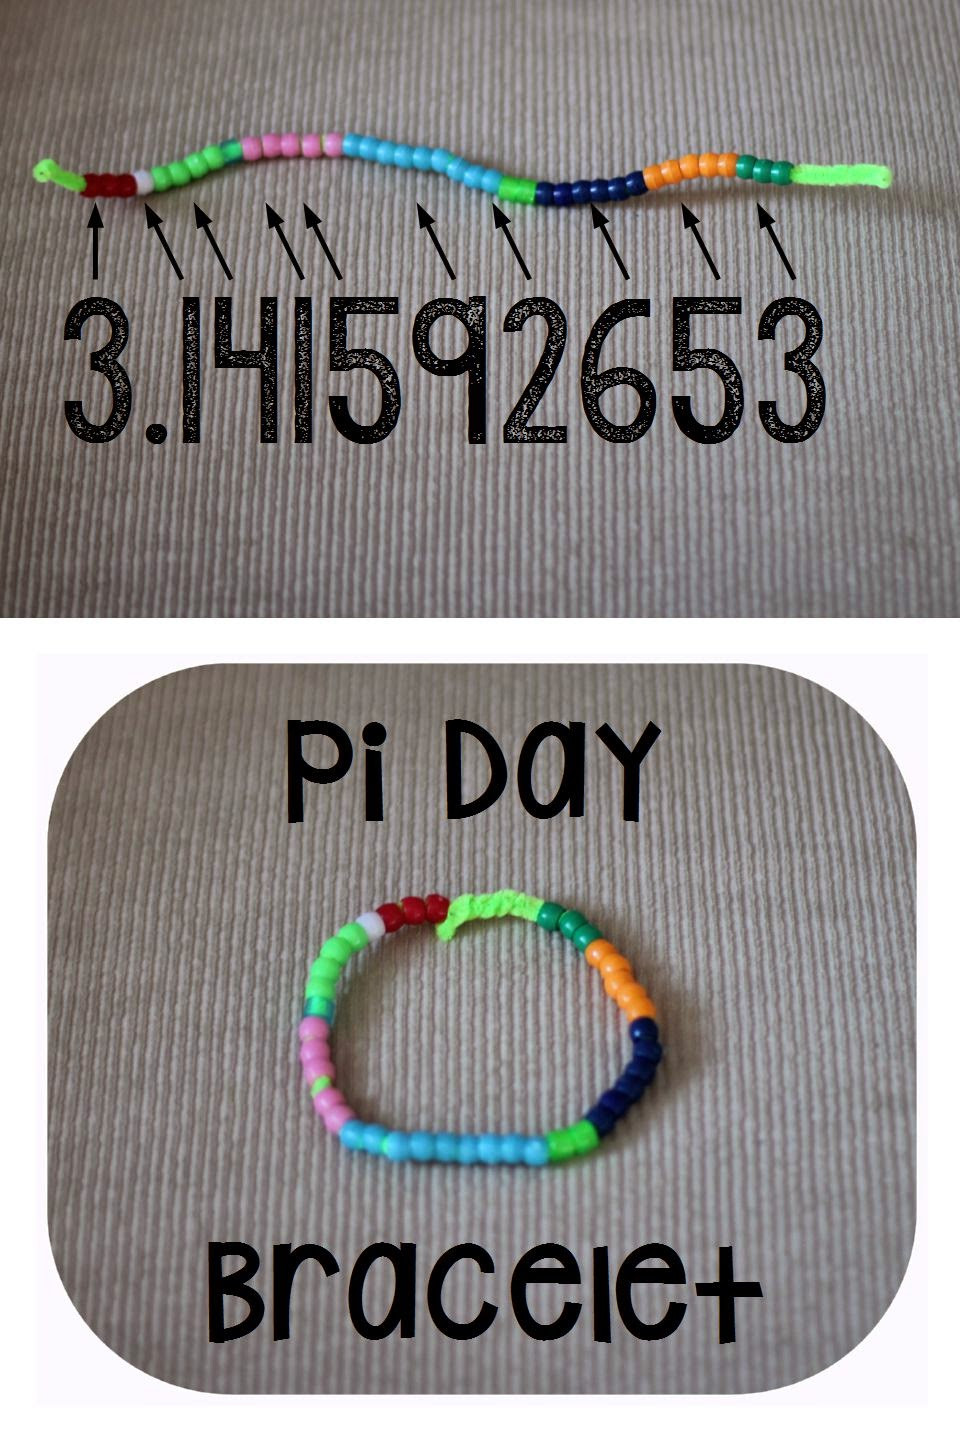 Fun Pi Day Activities
 Pi Day is on its way Pi Day Activities momgineer